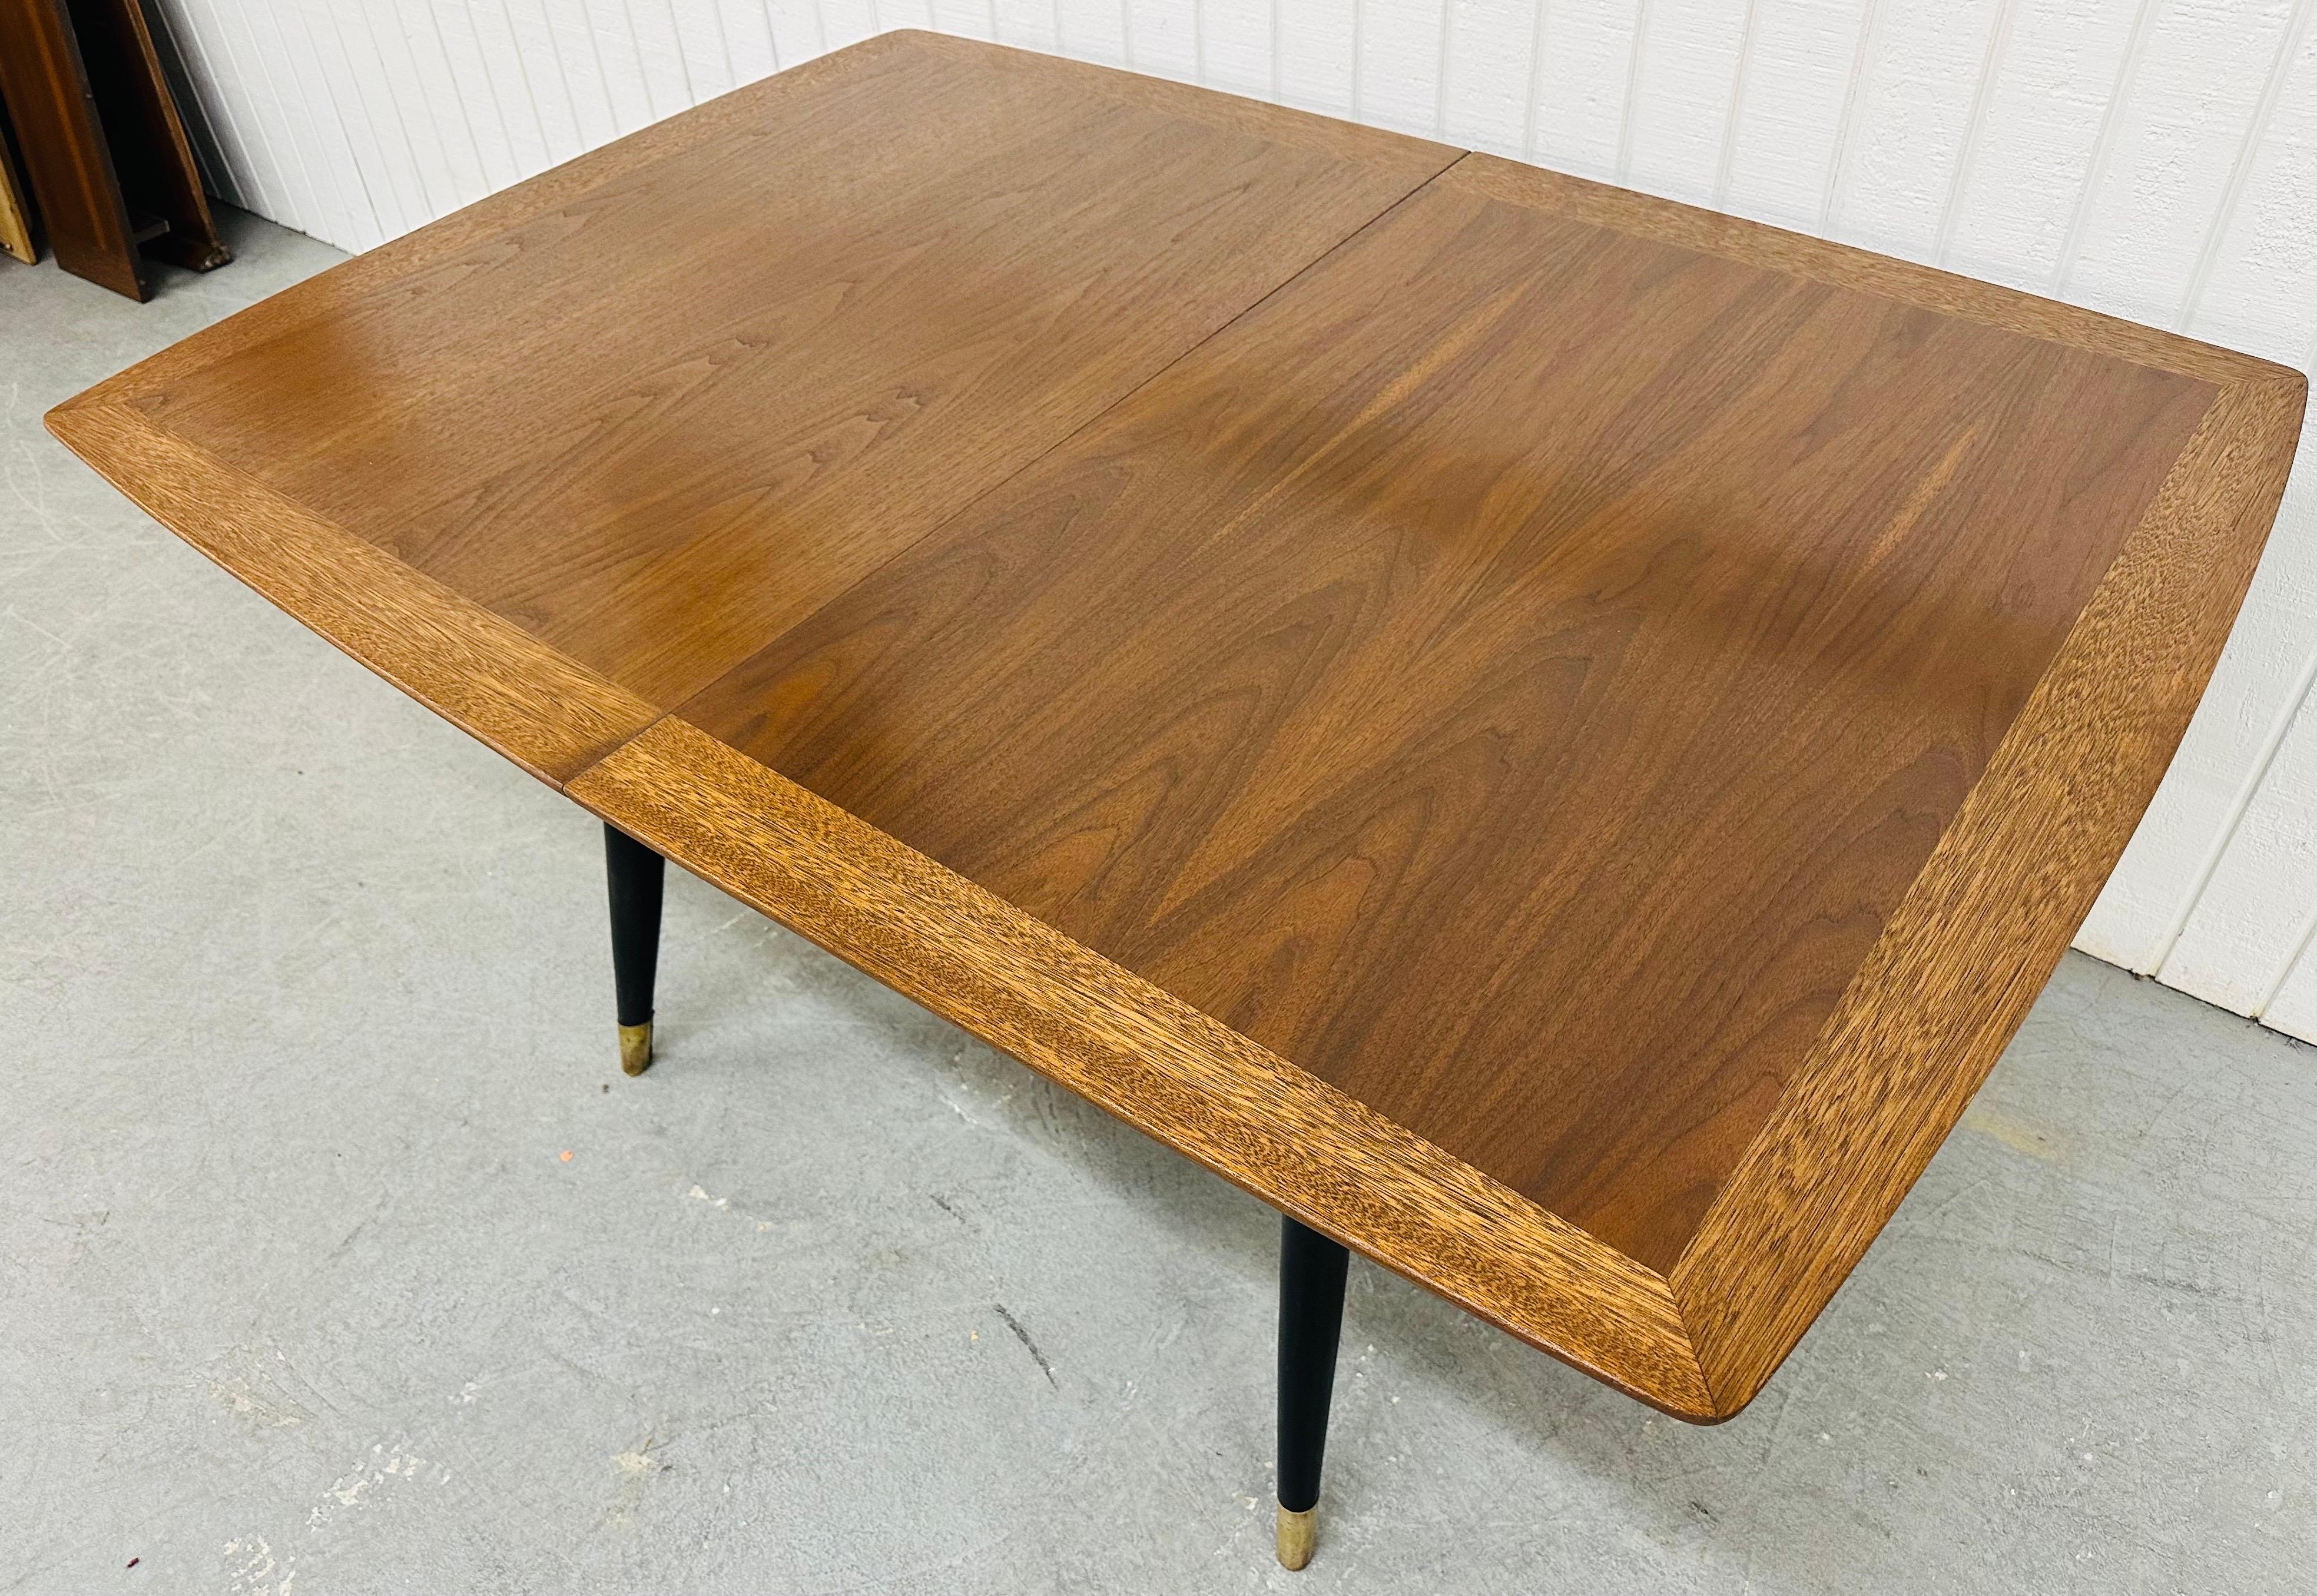 This listing is for a Mid-Century Modern Walnut Dining Table. Featuring a rectangular banded walnut top, ebonized legs with brass caps, and one leaf that extends the table to 72” L. This is an exceptional combination of quality and design!